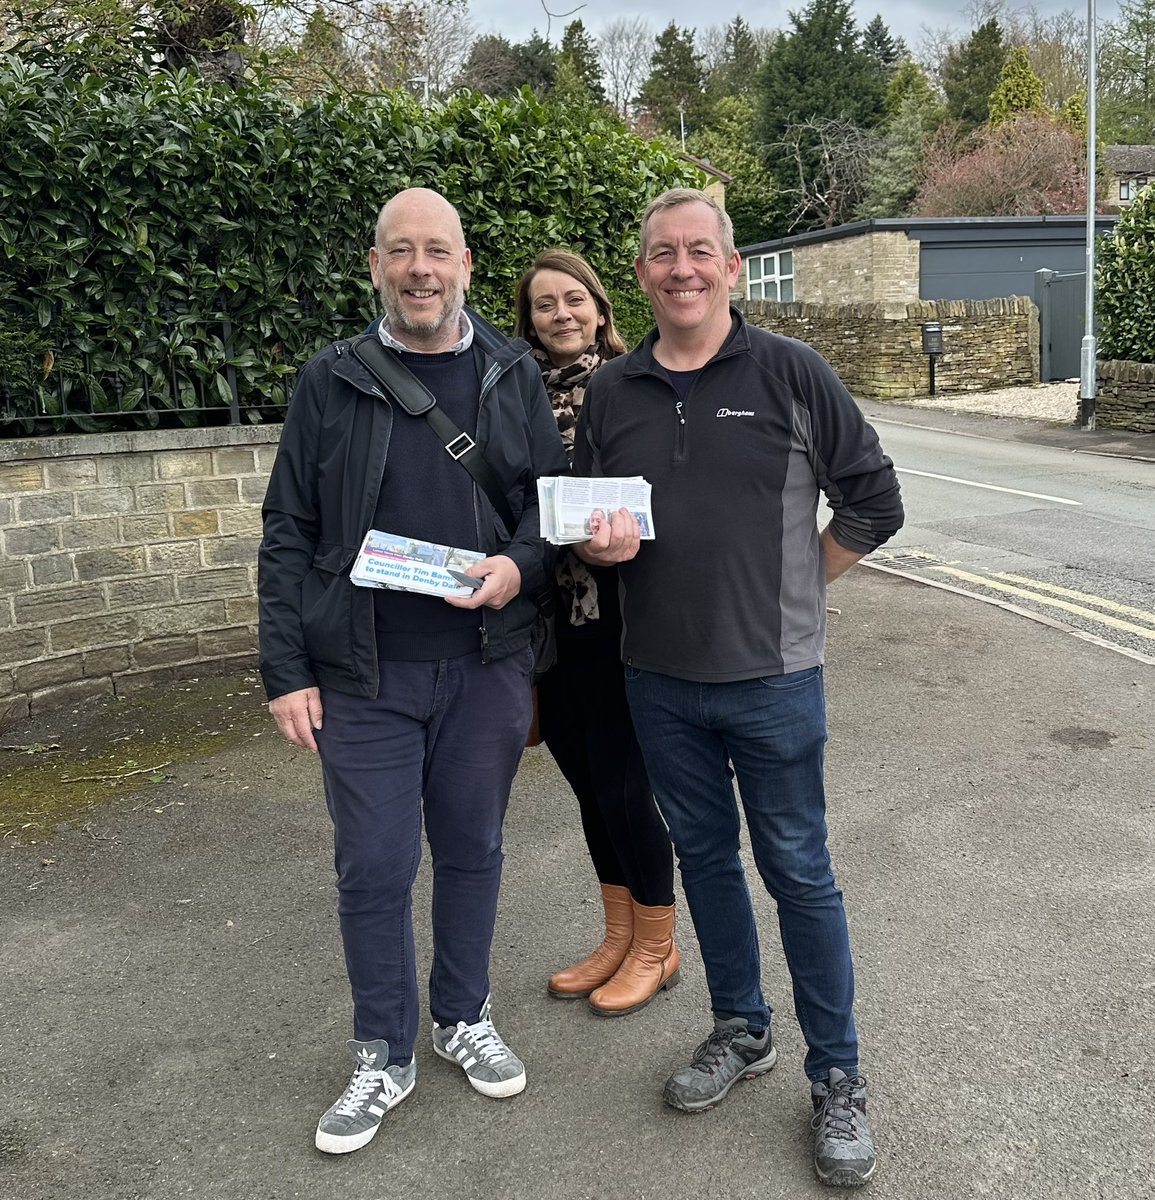 Lovely sunny day in Denby Dale, out campaigning as the local Conservative MP and member of the @adidasoriginals Samba Community. #denbydale #adidassamba #threestripe #conservatives